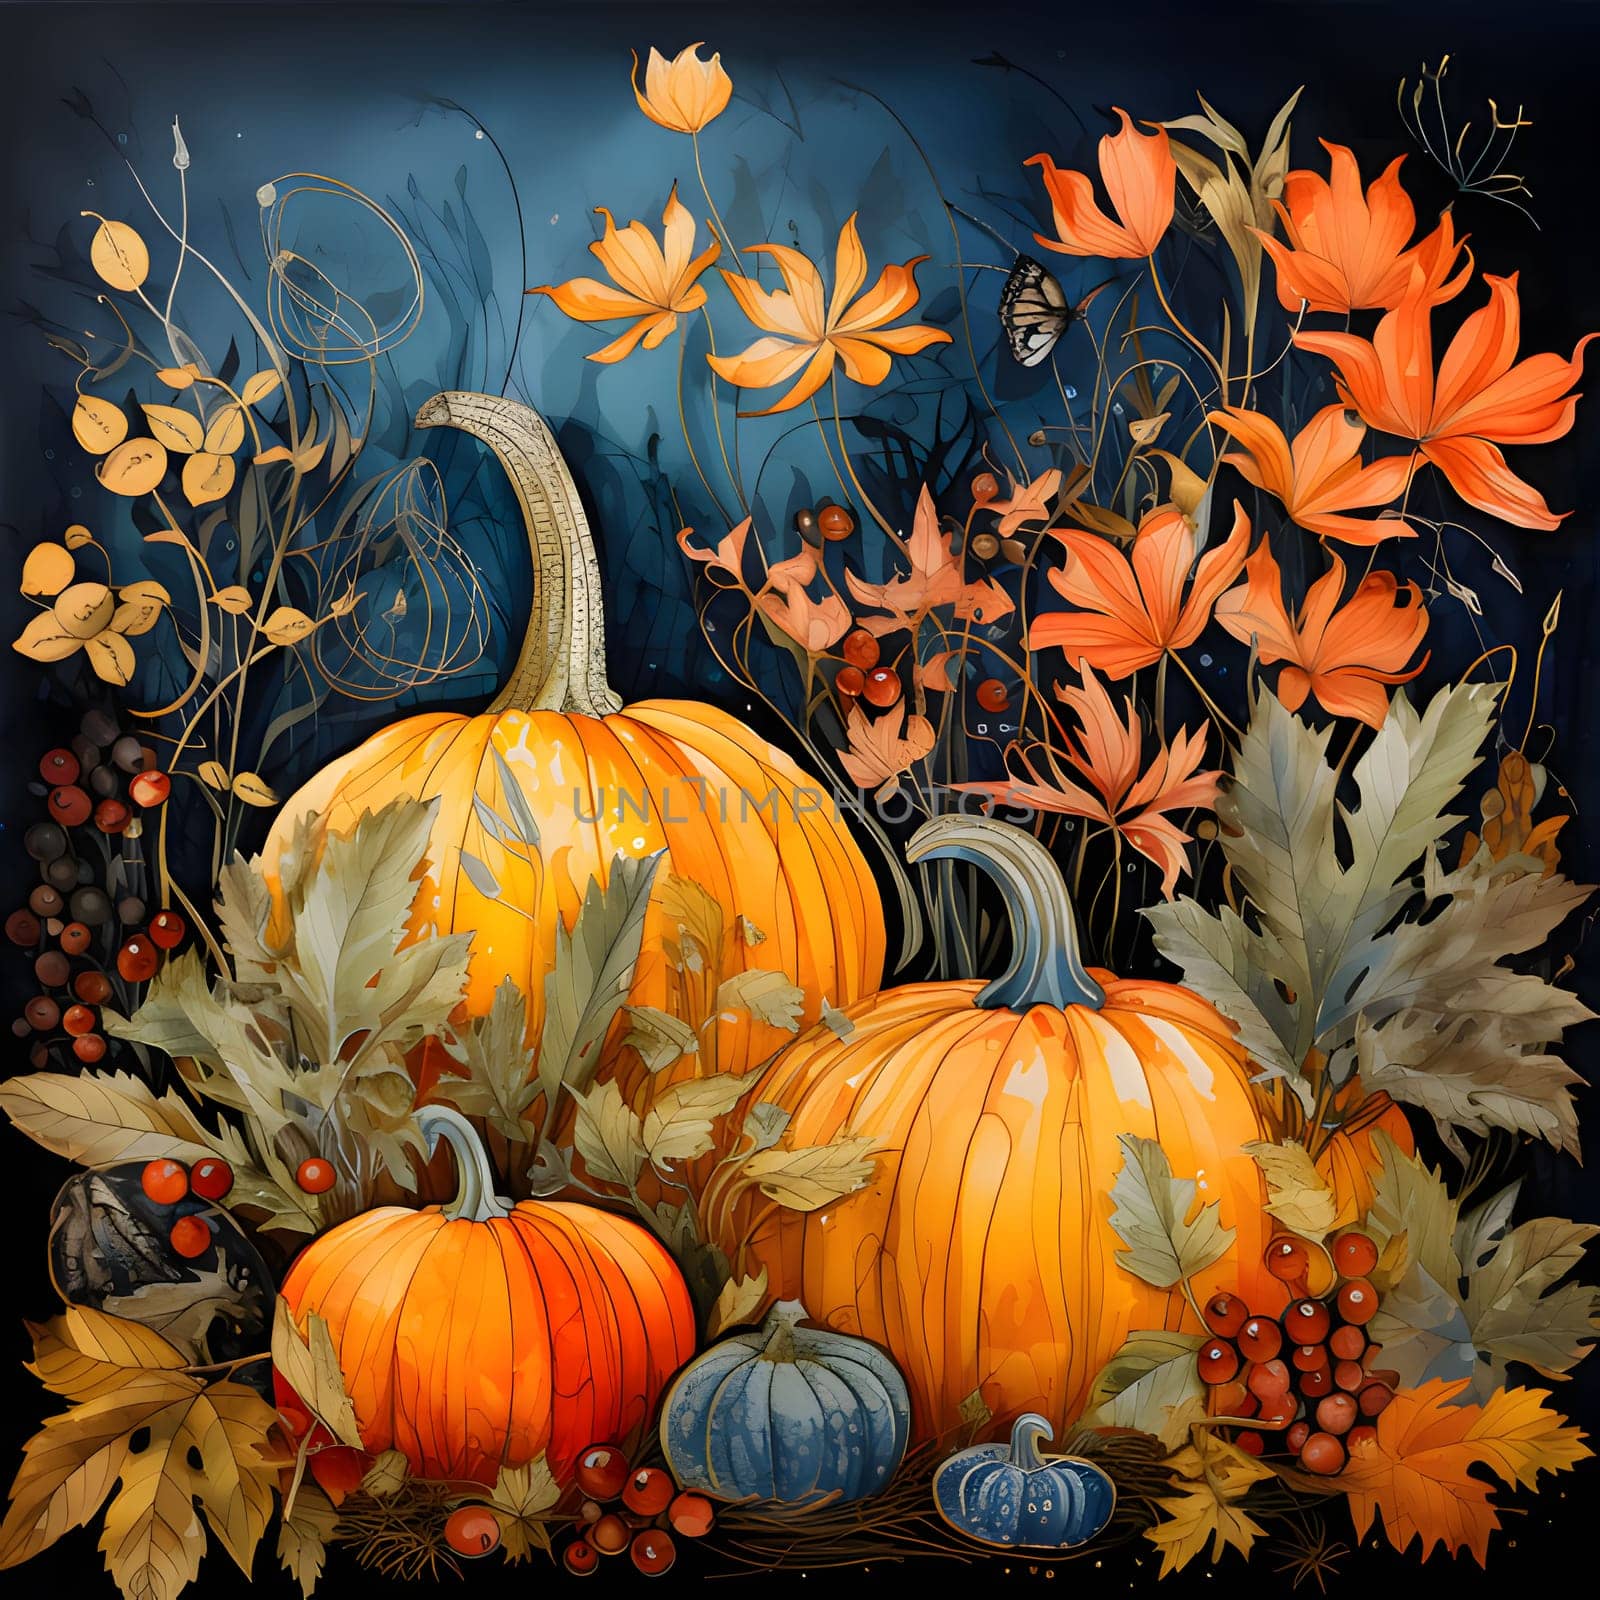 Illustration; pumpkins flowers rowan on dark background. Pumpkin as a dish of thanksgiving for the harvest. An atmosphere of joy and celebration.